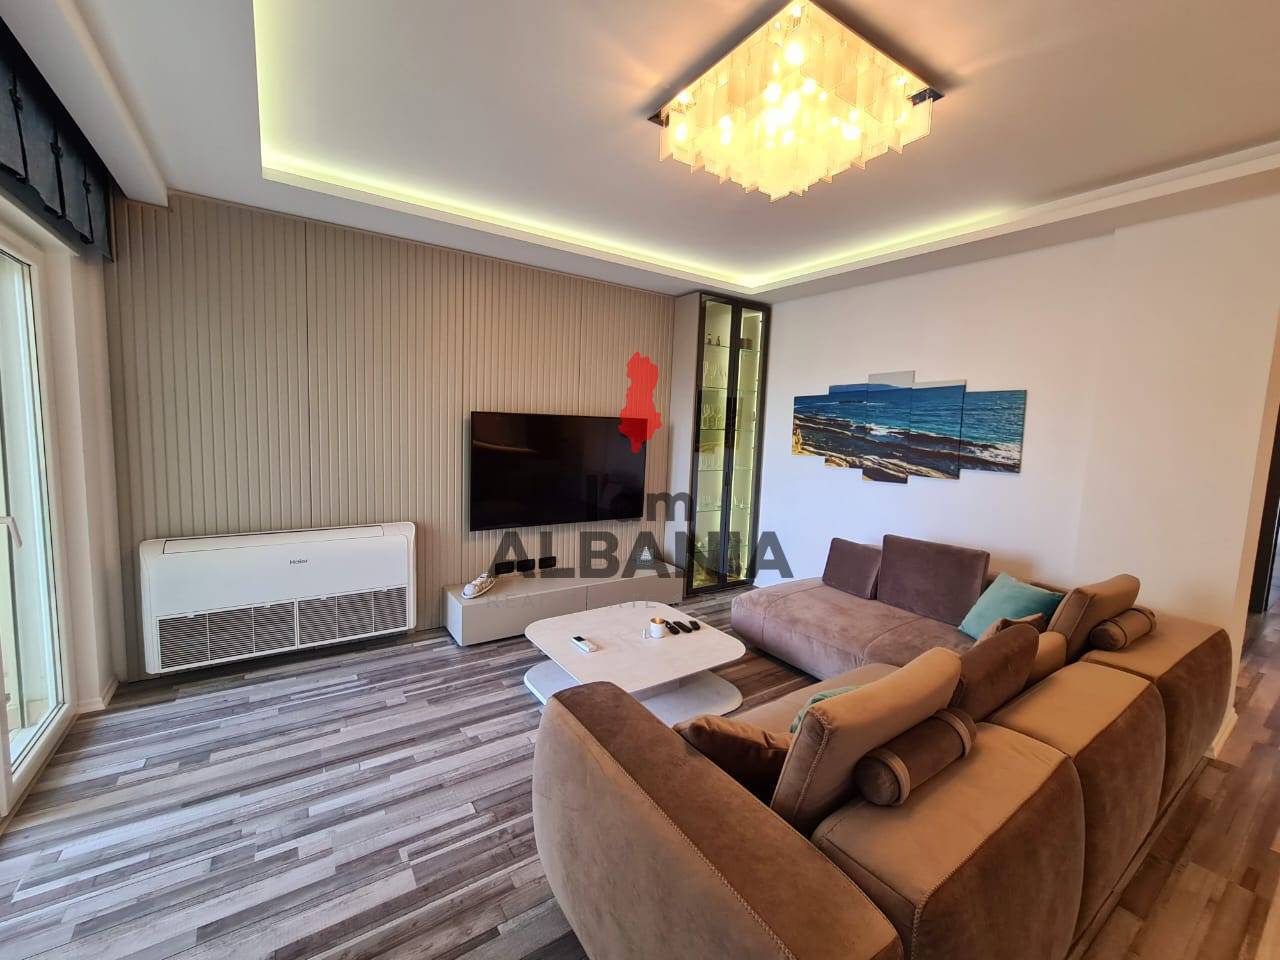 Albania, Charming 3-room apartment in a new building